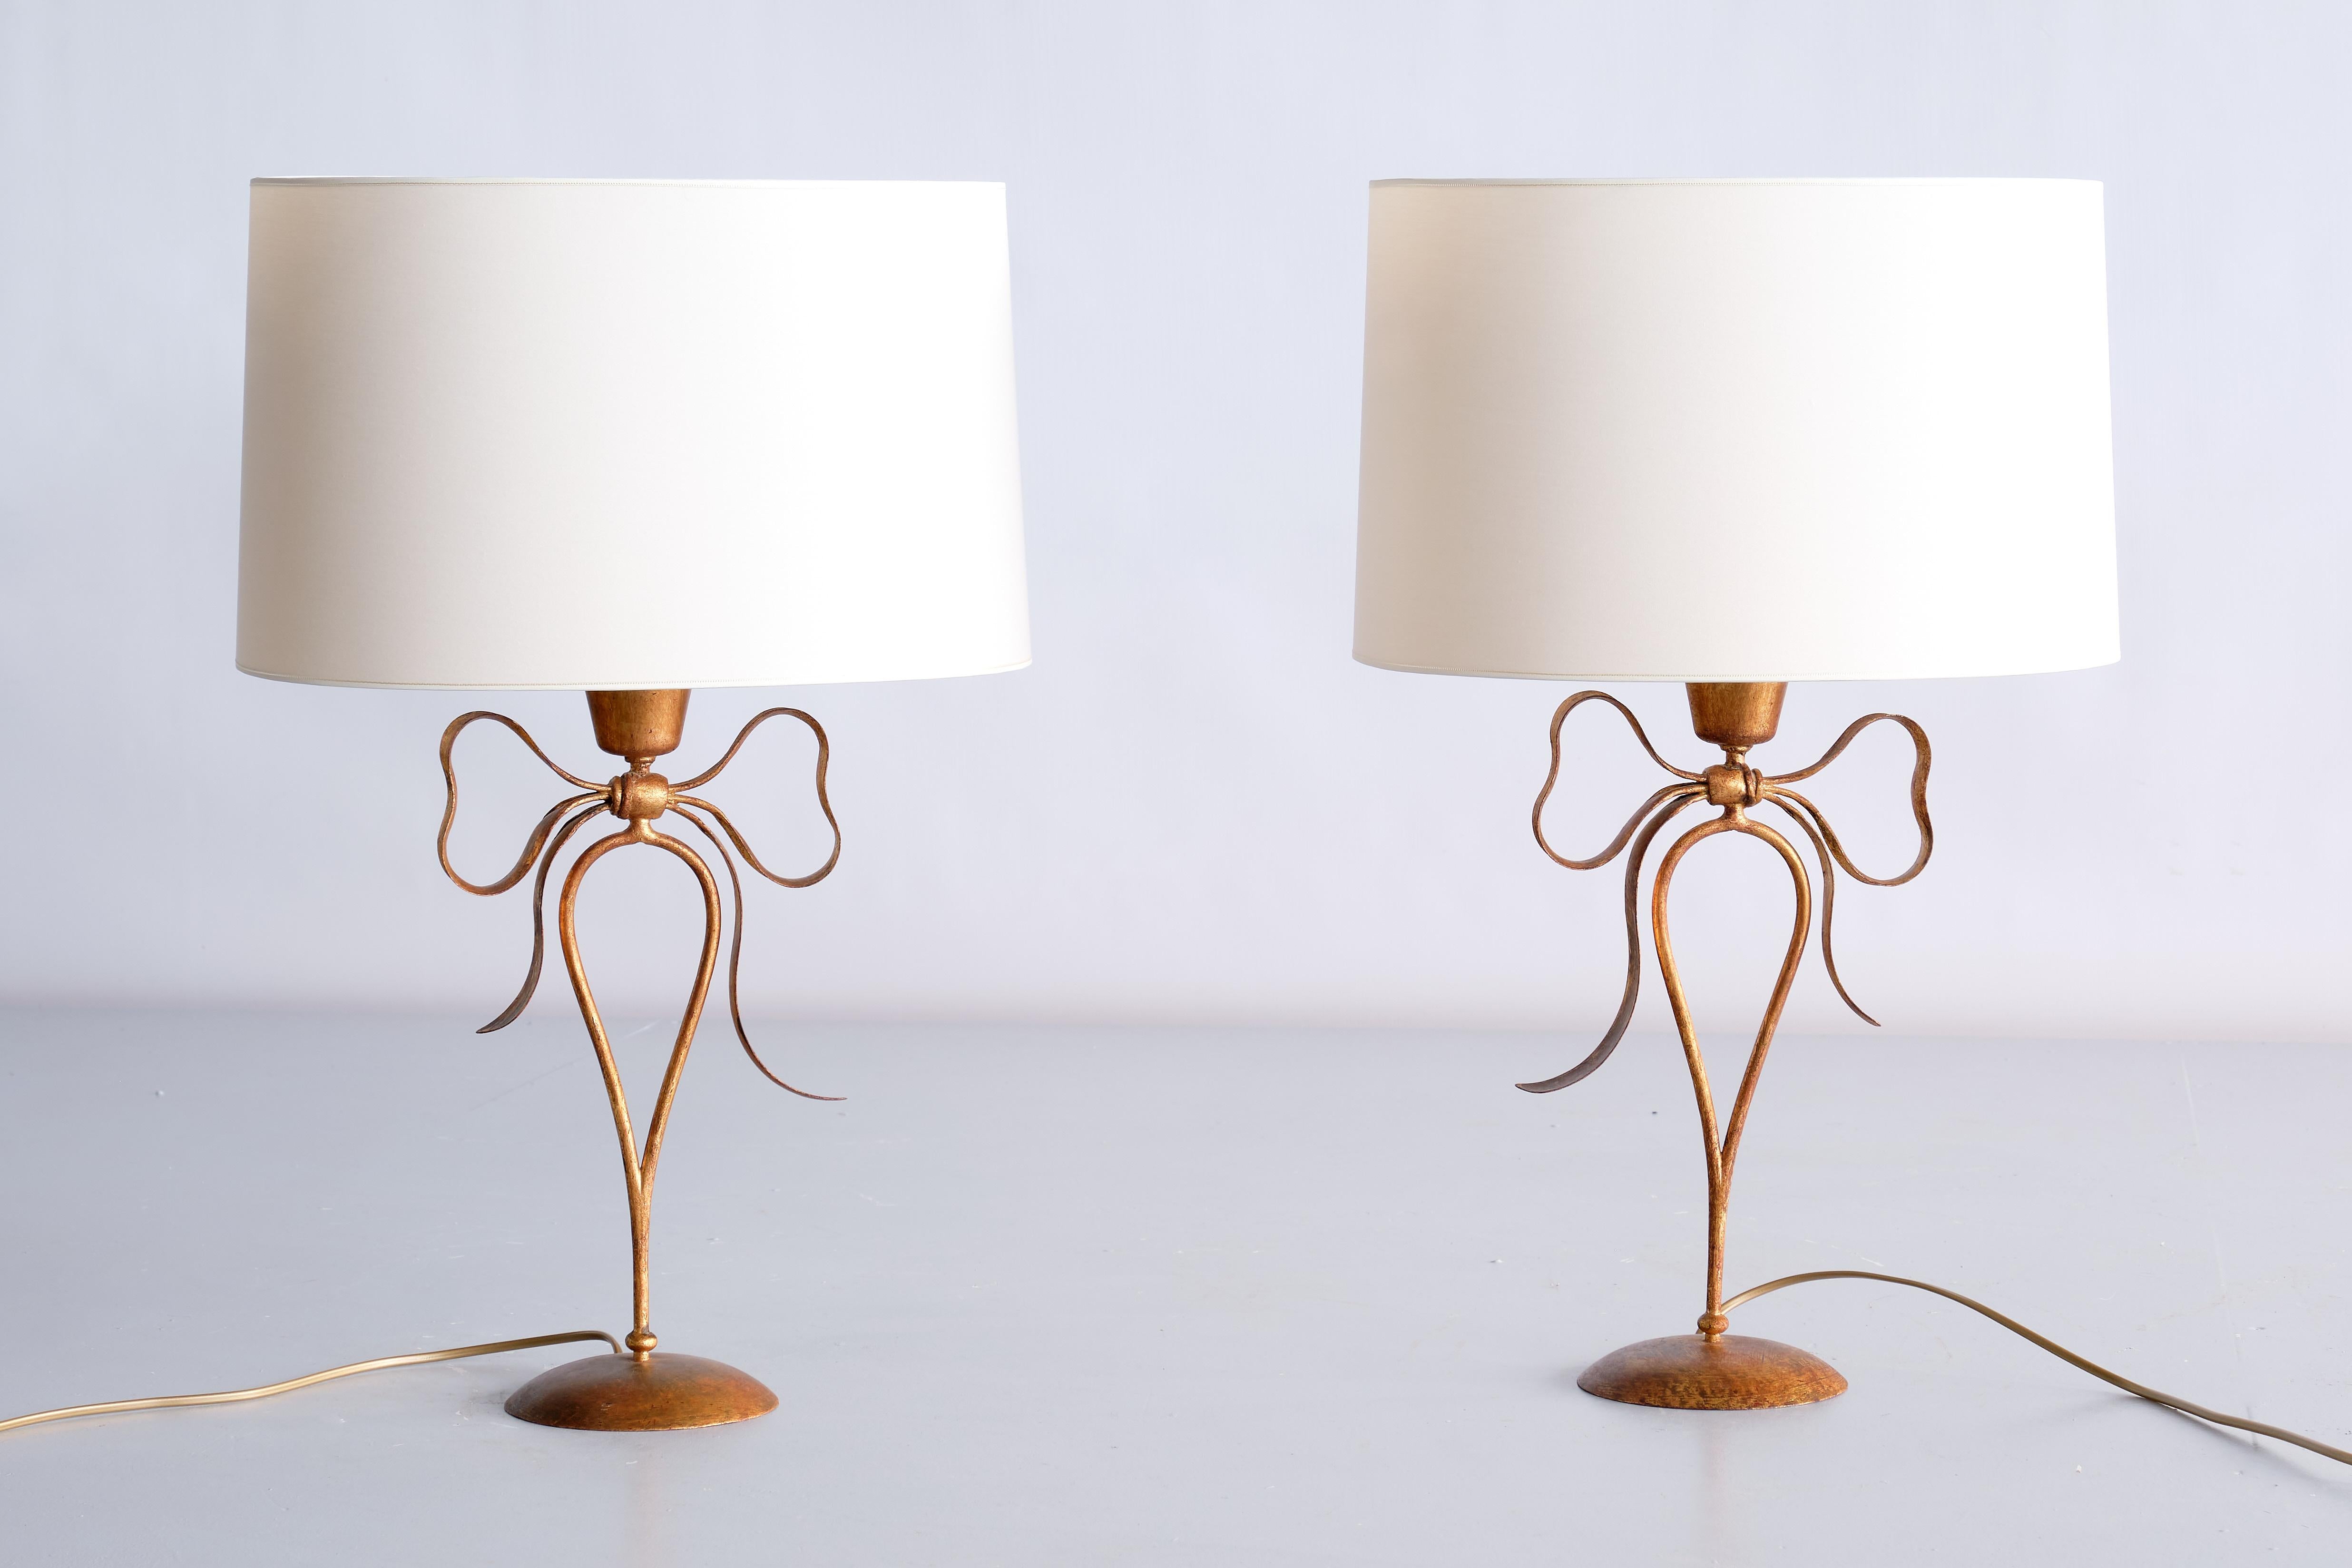 Pair of Gilded Bow Shaped Table Lamps by Mingazzi Bologna, Italy, 1950s 1